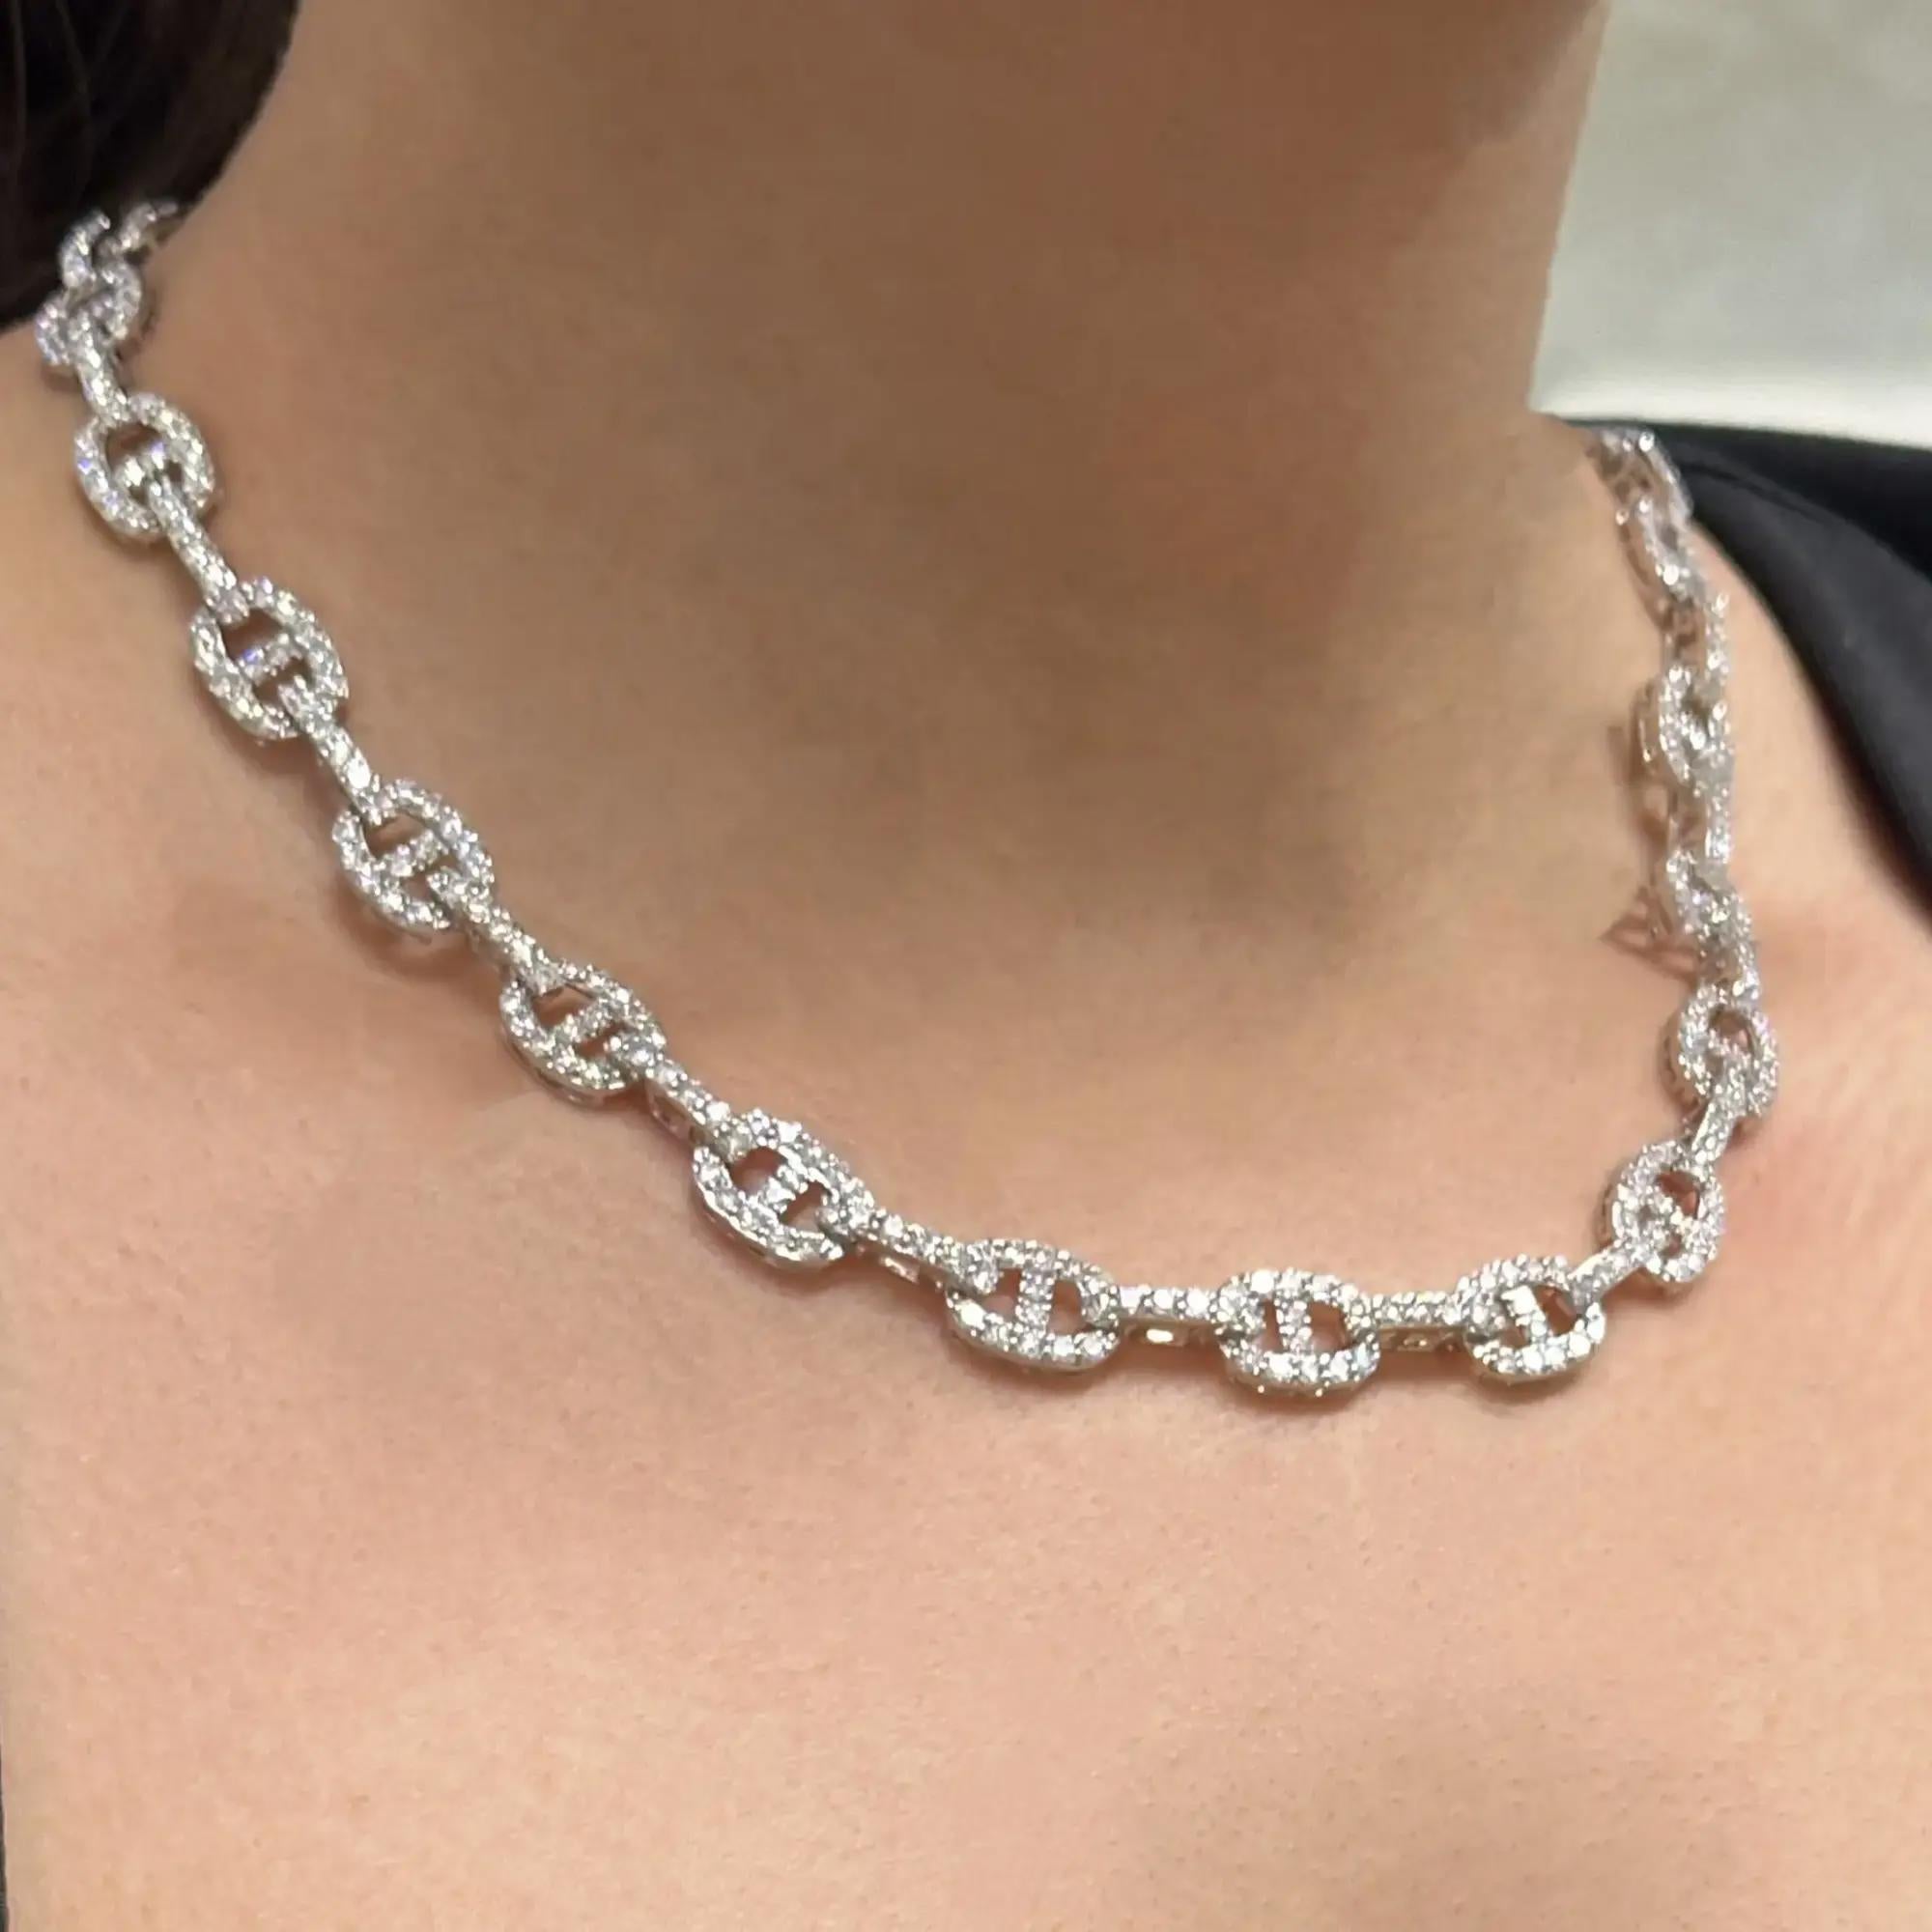 Round Cut Diamond Link Chain Necklace 18K White Gold 14.96Cttw 17.5 Inches For Sale 2